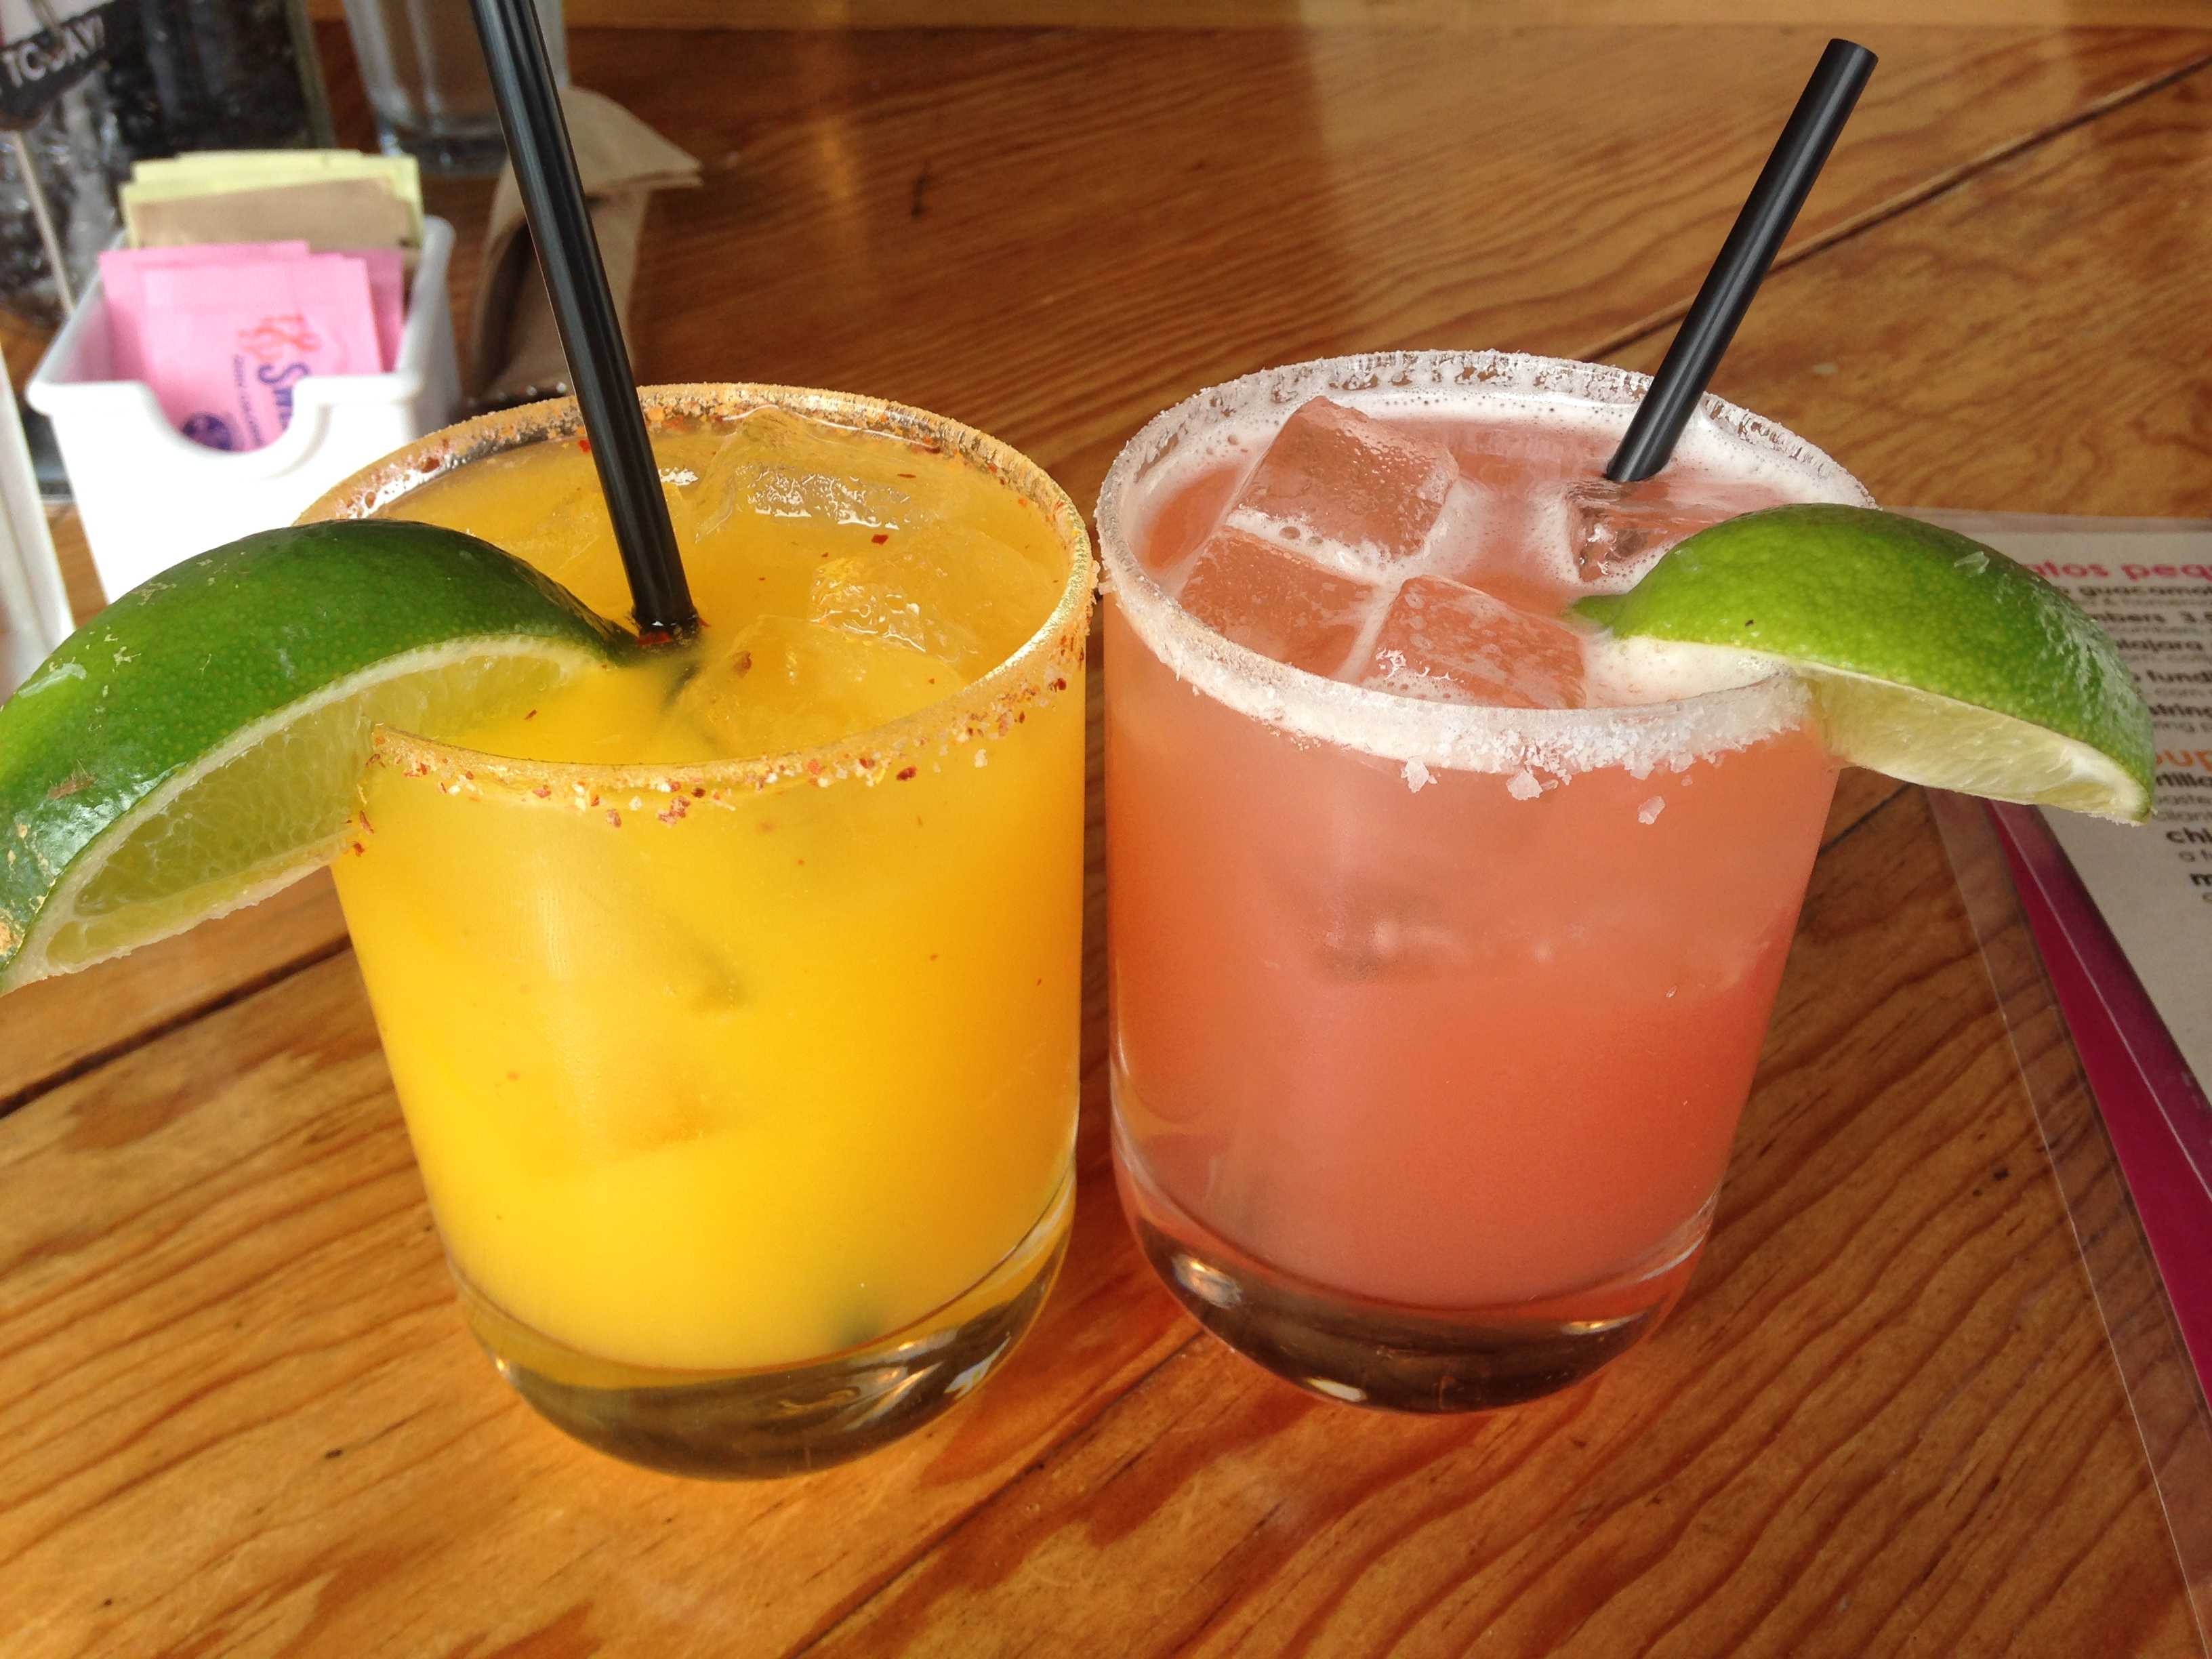 Barrio Star in Bankers Hill offers a variety of margaritas at fair prices. Photo credit: Michelle Moran